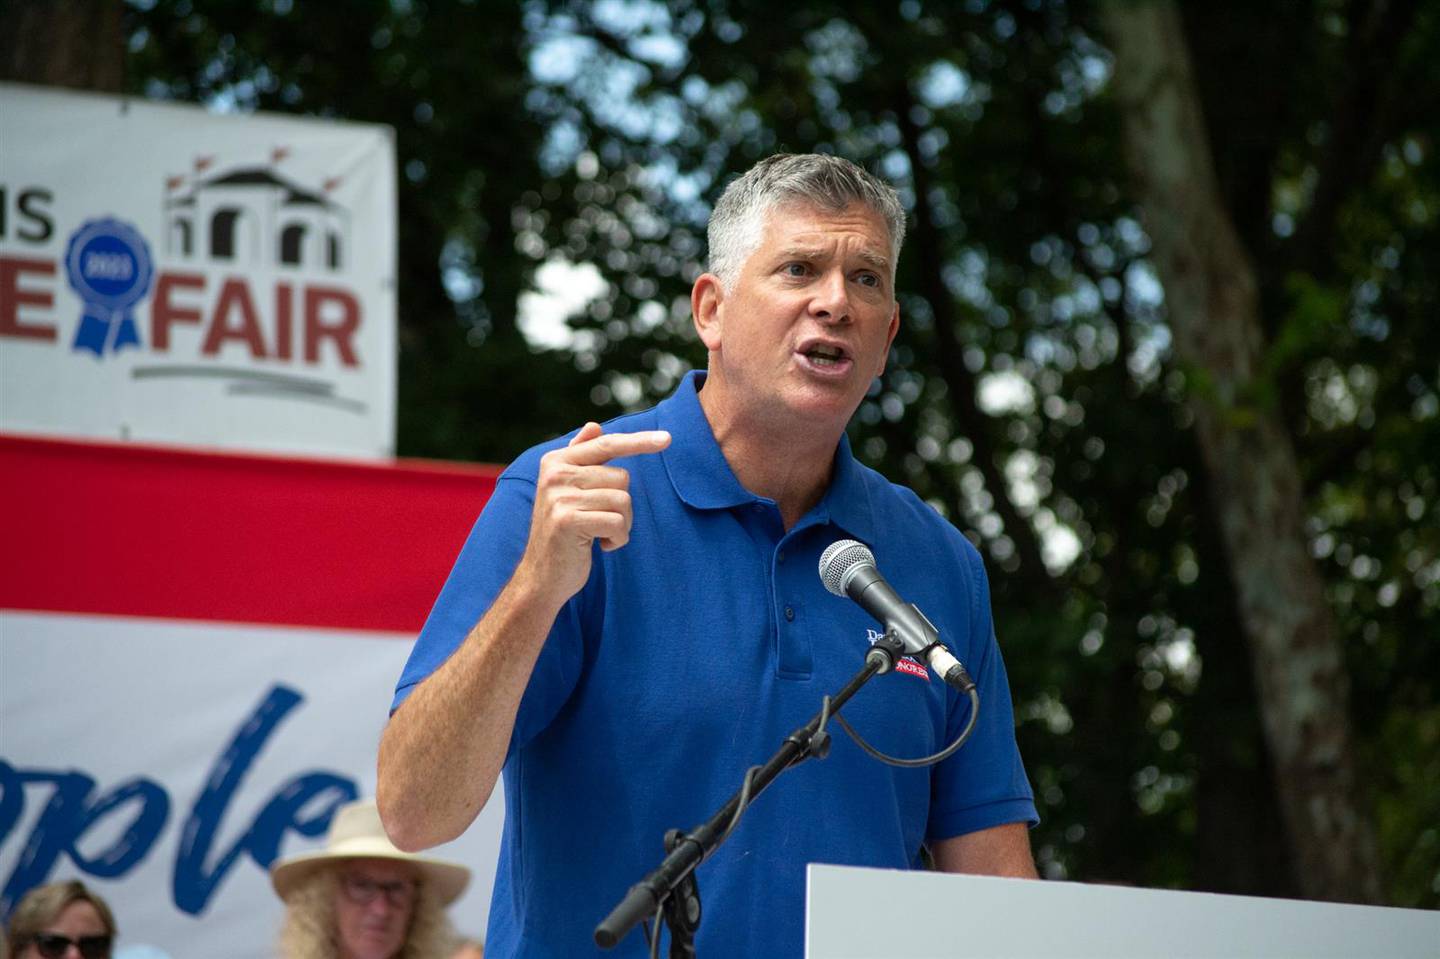 U.S. Rep Darin LaHood, of Dunlap, speaks to the crowd during Illinois State Fair Republican Day festivities in Springfield.